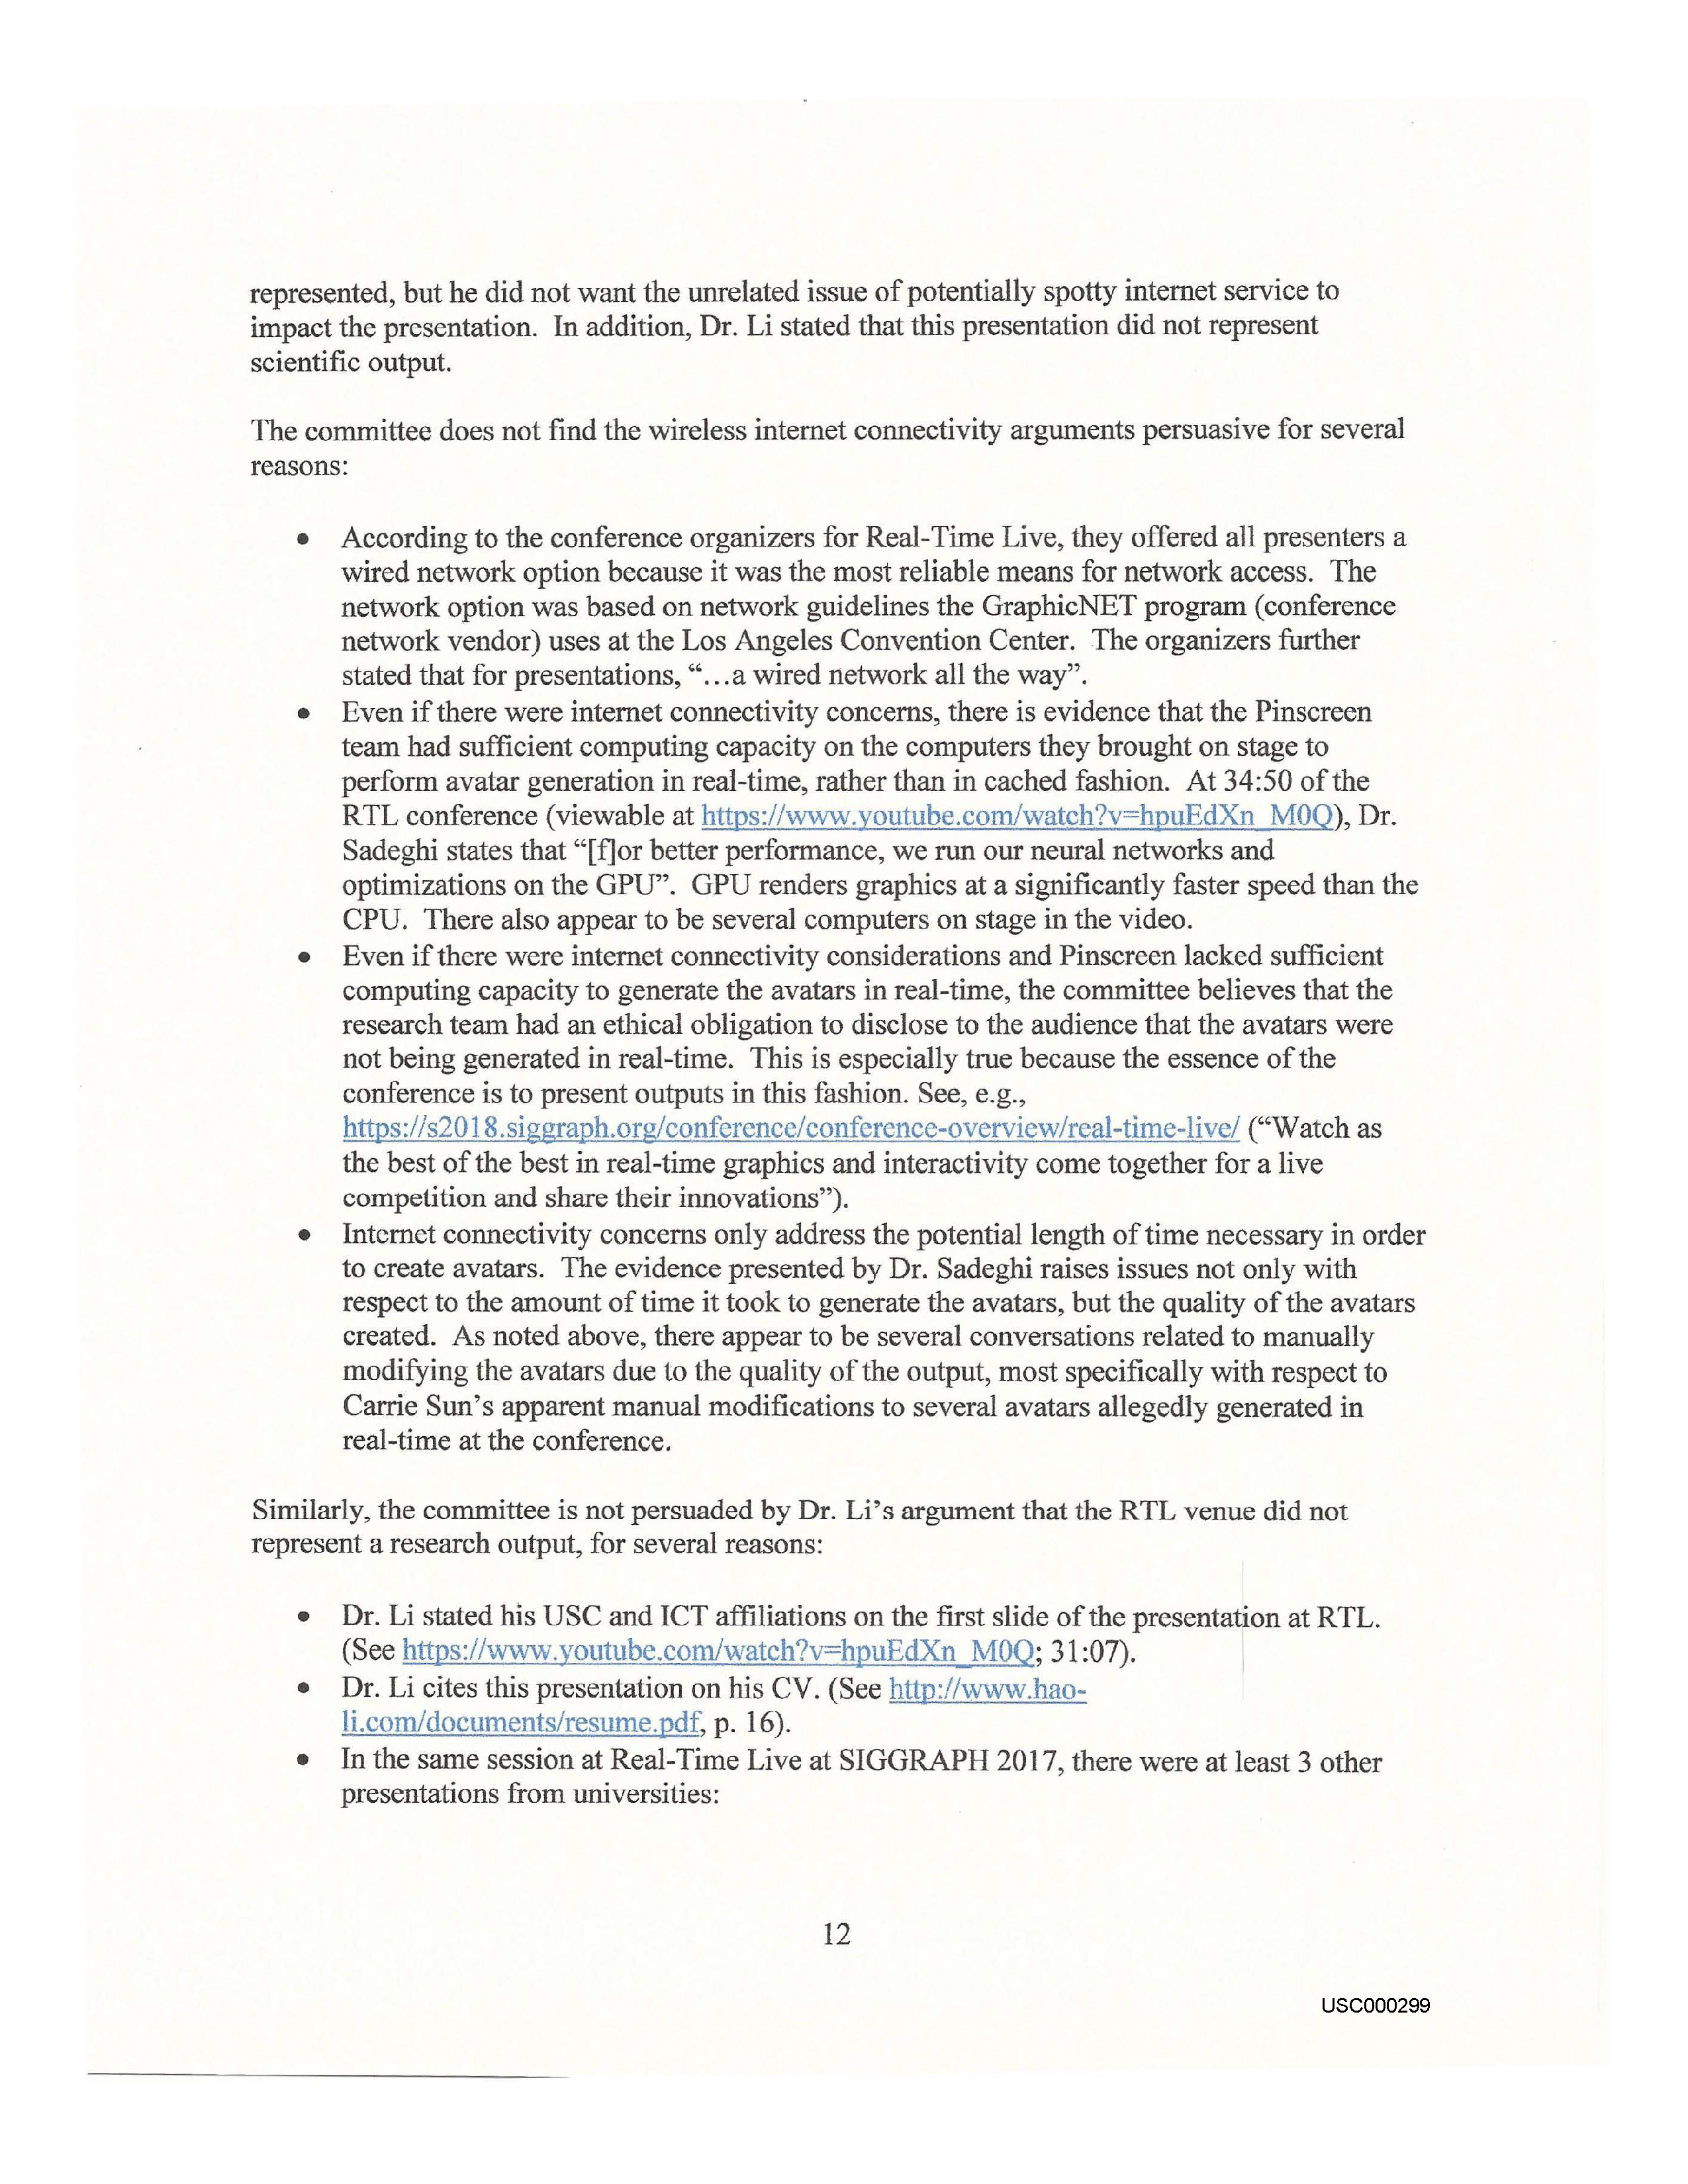 USC's Investigation Report re Hao Li's and Pinscreen's Scientific Misconduct at ACM SIGGRAPH RTL 2017 - Summary Page 29